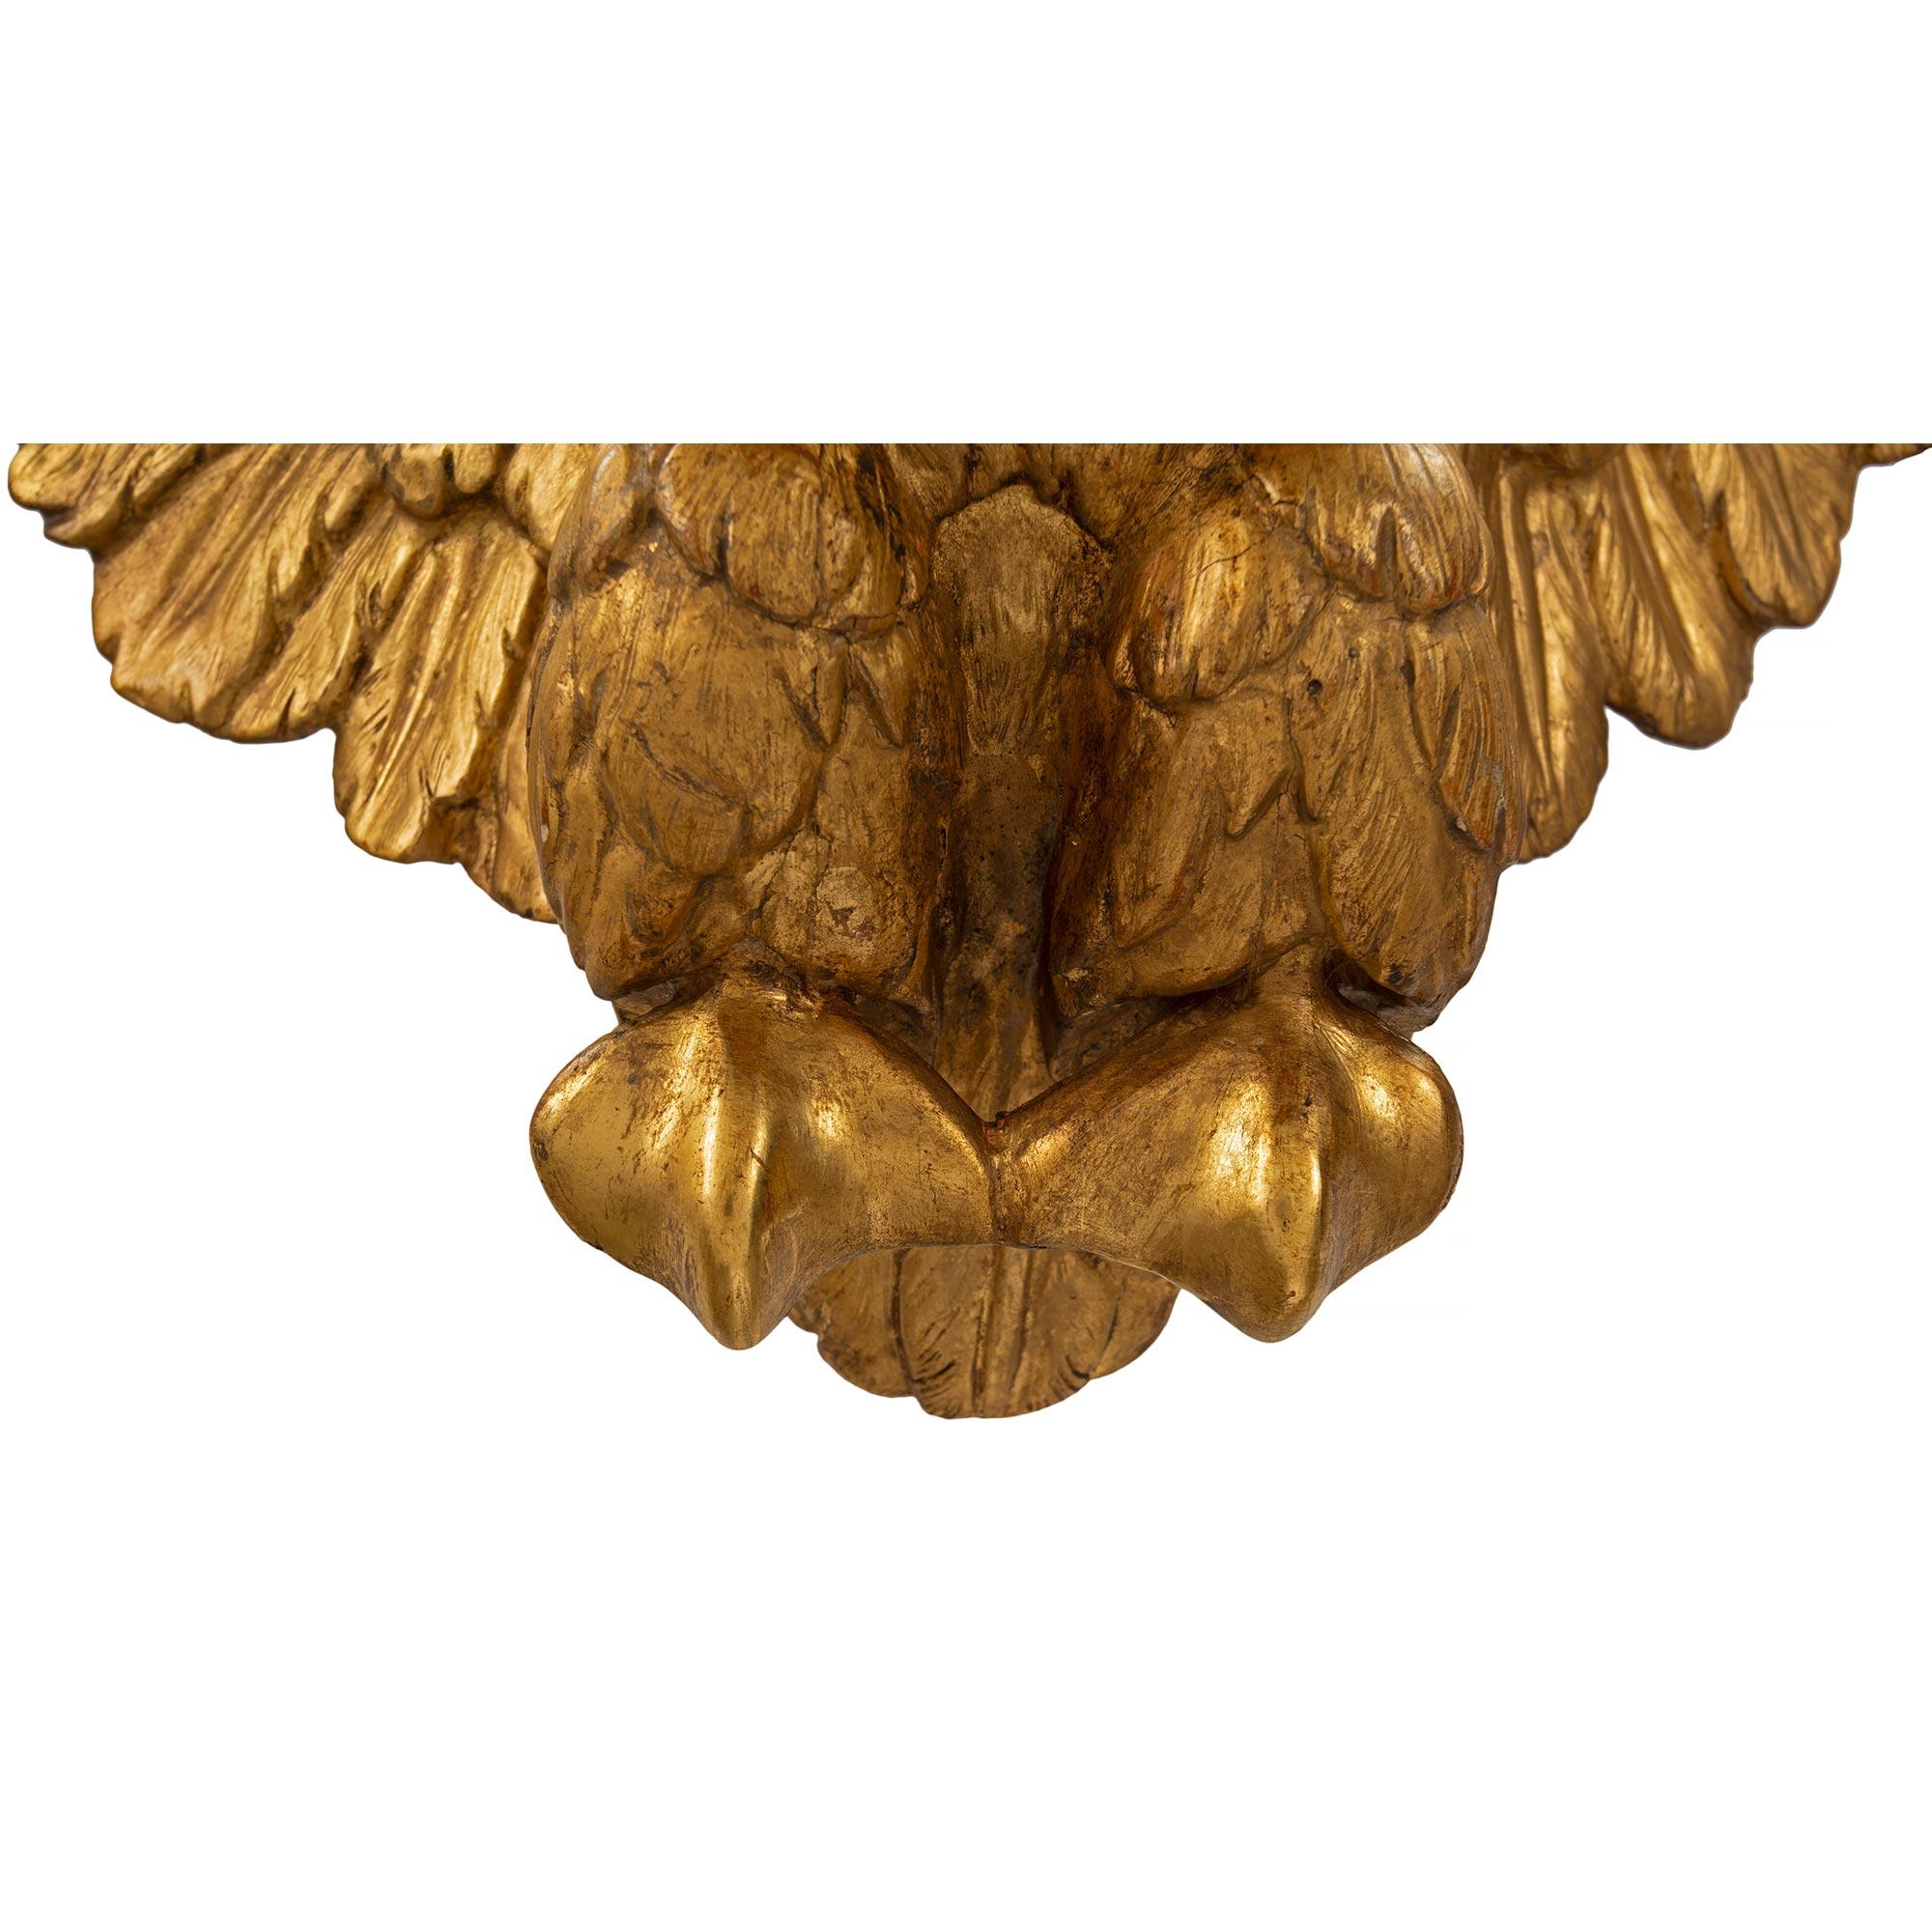 Italian Mid-18th Century Louis XVI Period Wall Mounted Open Winged Giltwood Swan For Sale 2